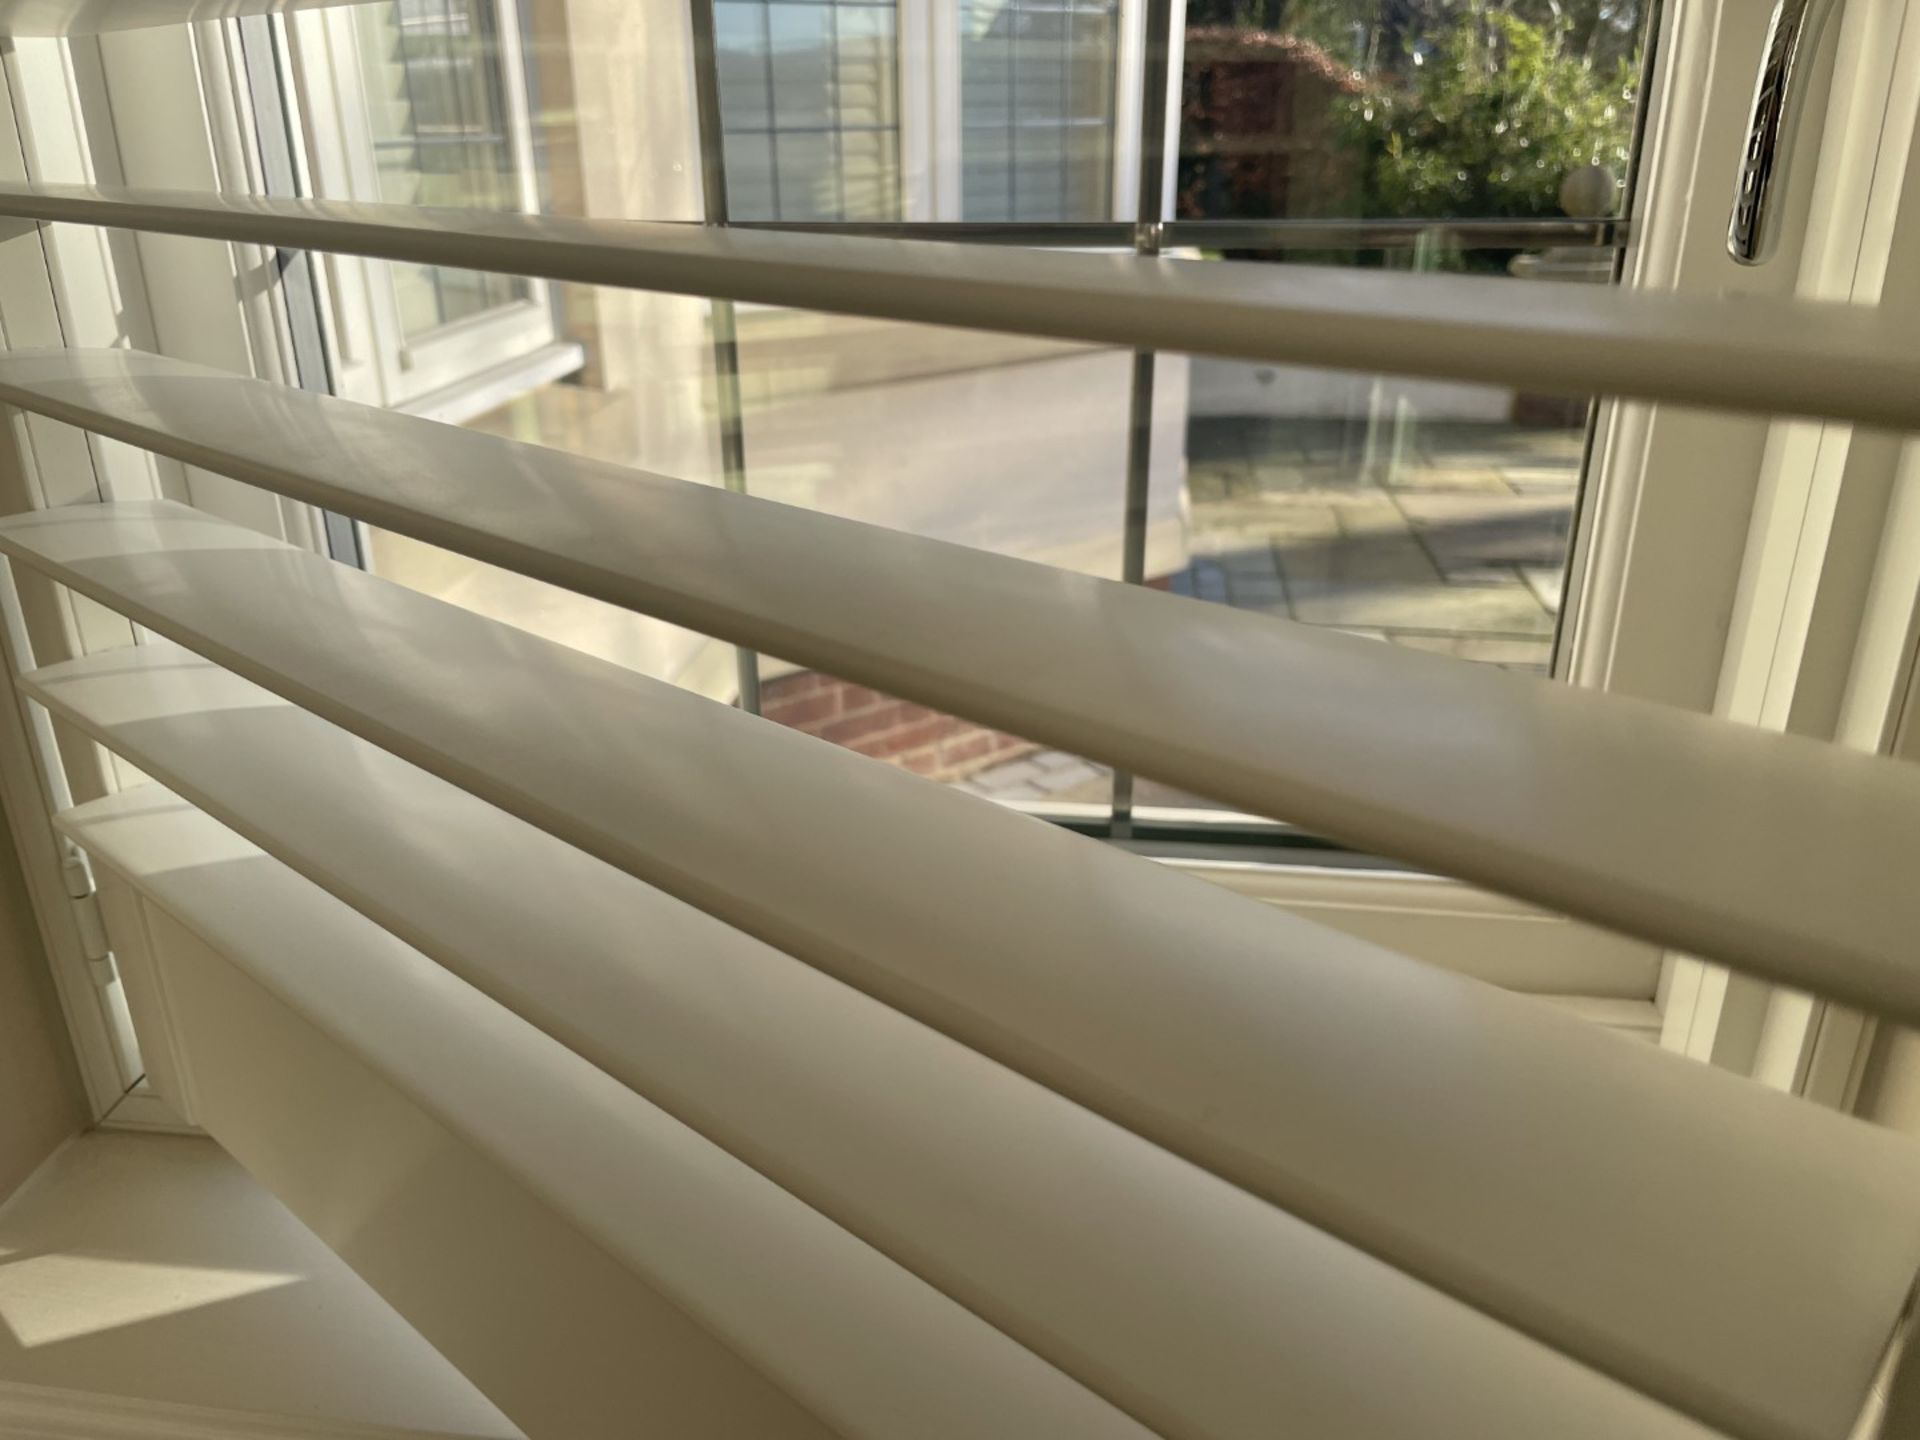 1 x Hardwood Timber Double Glazed Window Frames fitted with Shutter Blinds, In White - Ref: PAN106 - Image 6 of 23